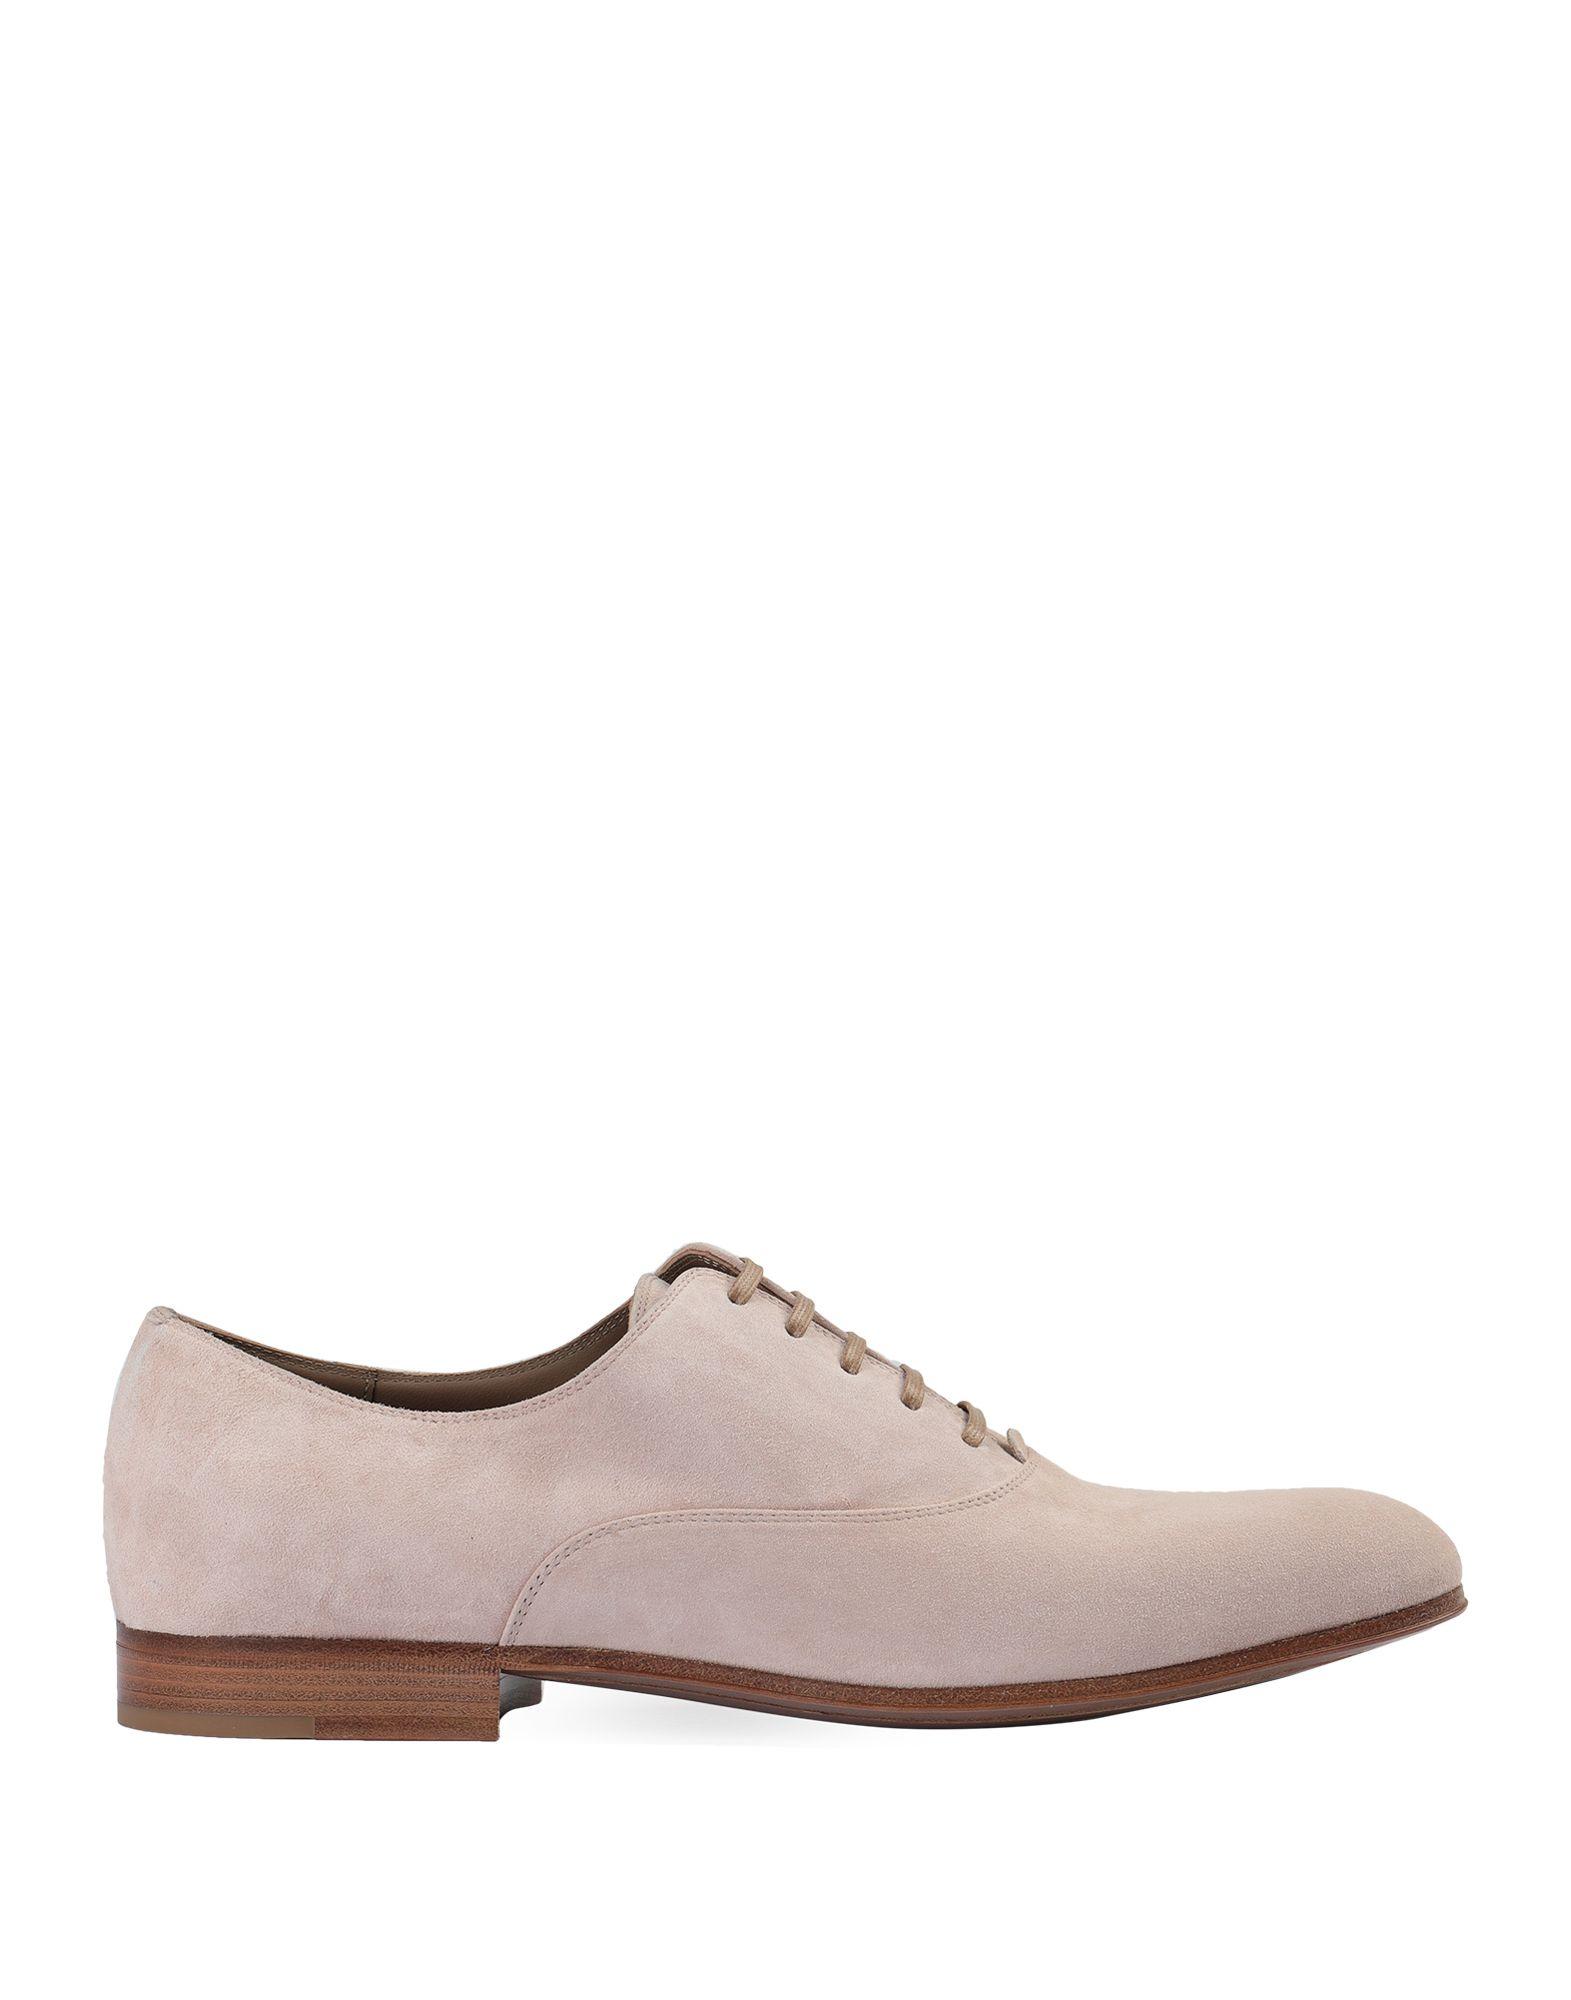 Gianvito Rossi Suede Lace-up Shoe in Light Pink (Pink) for Men - Lyst